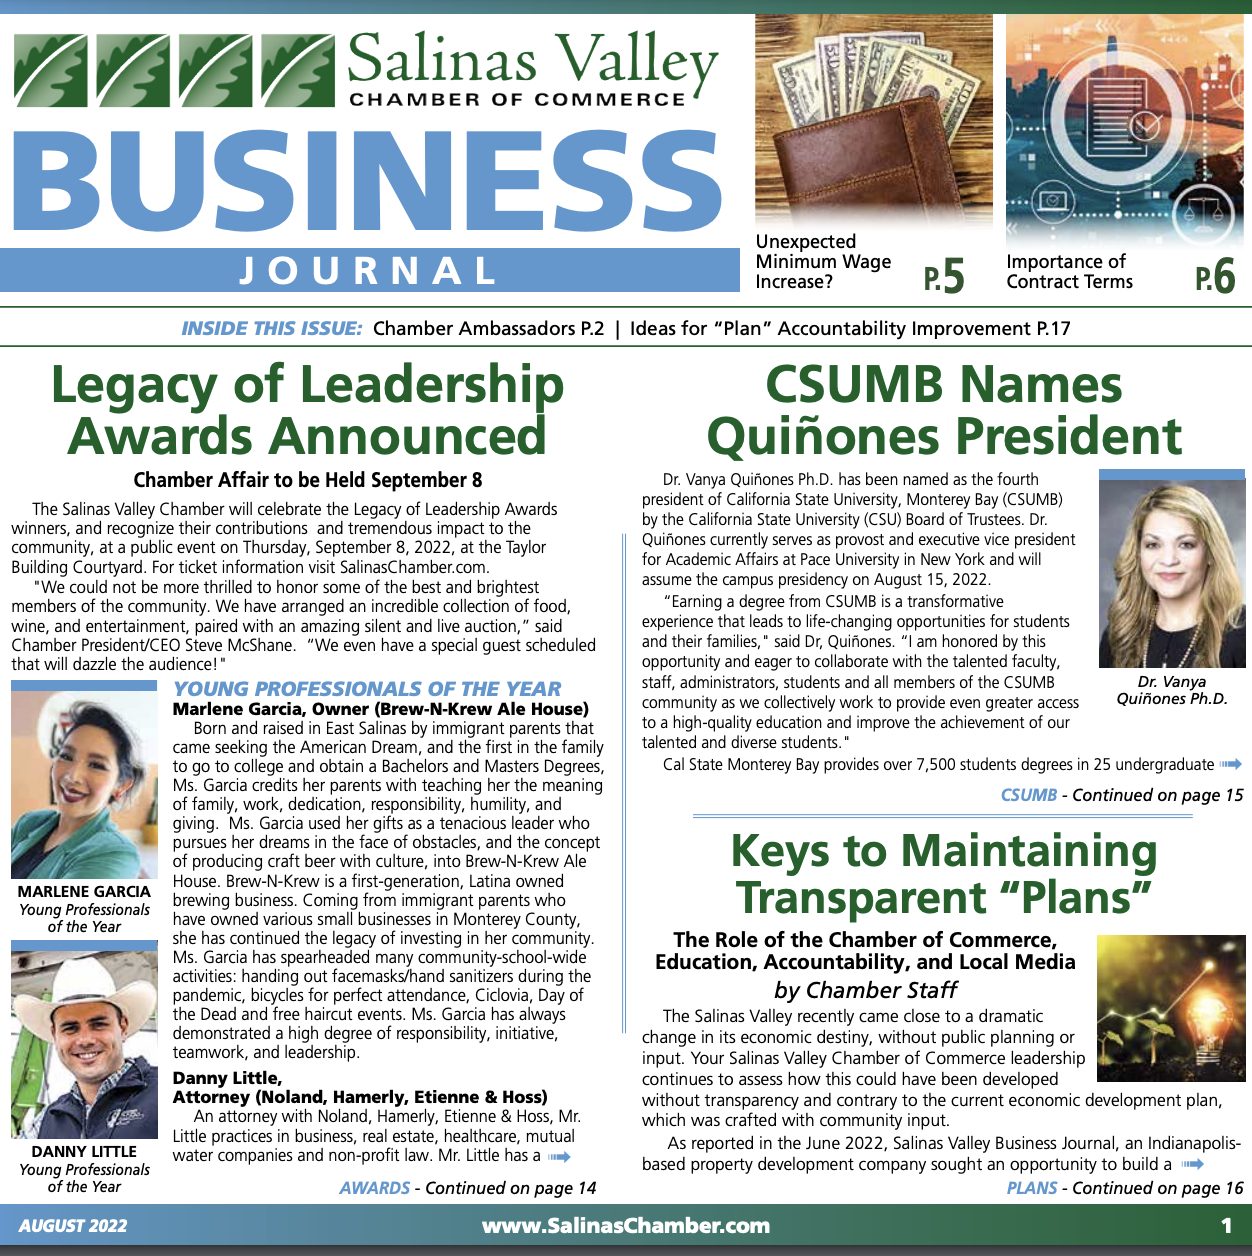 Business News in Salinas Valley